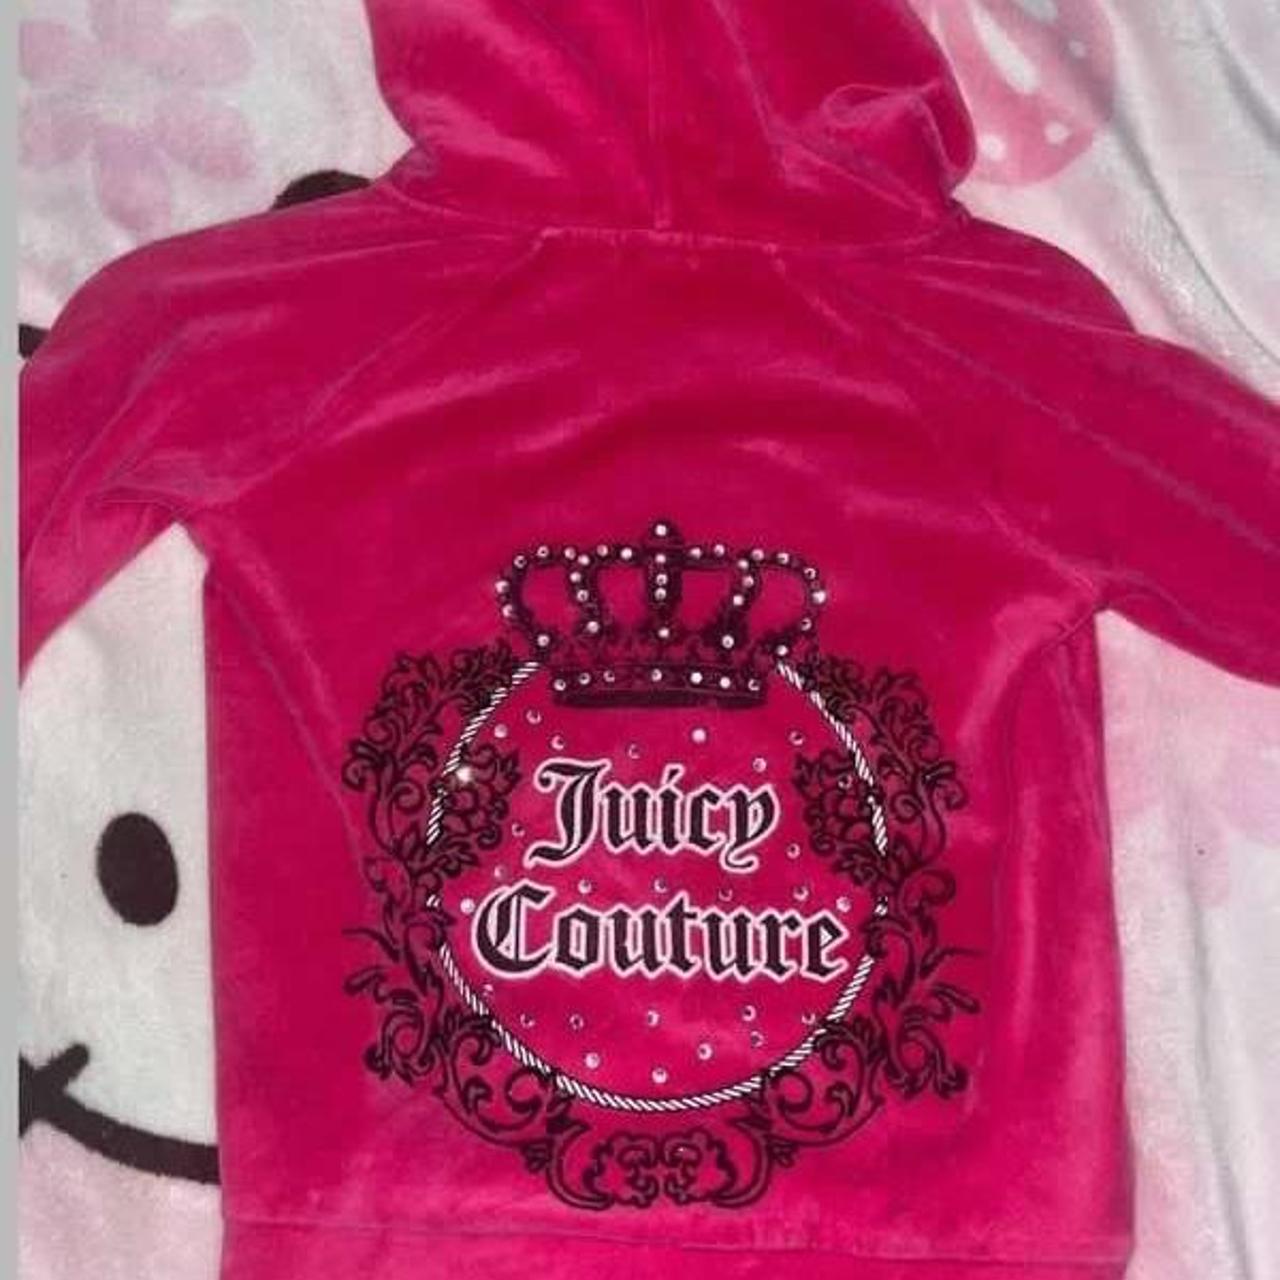 Hot pink juicy couture jacket I’ll upload some new... - Depop